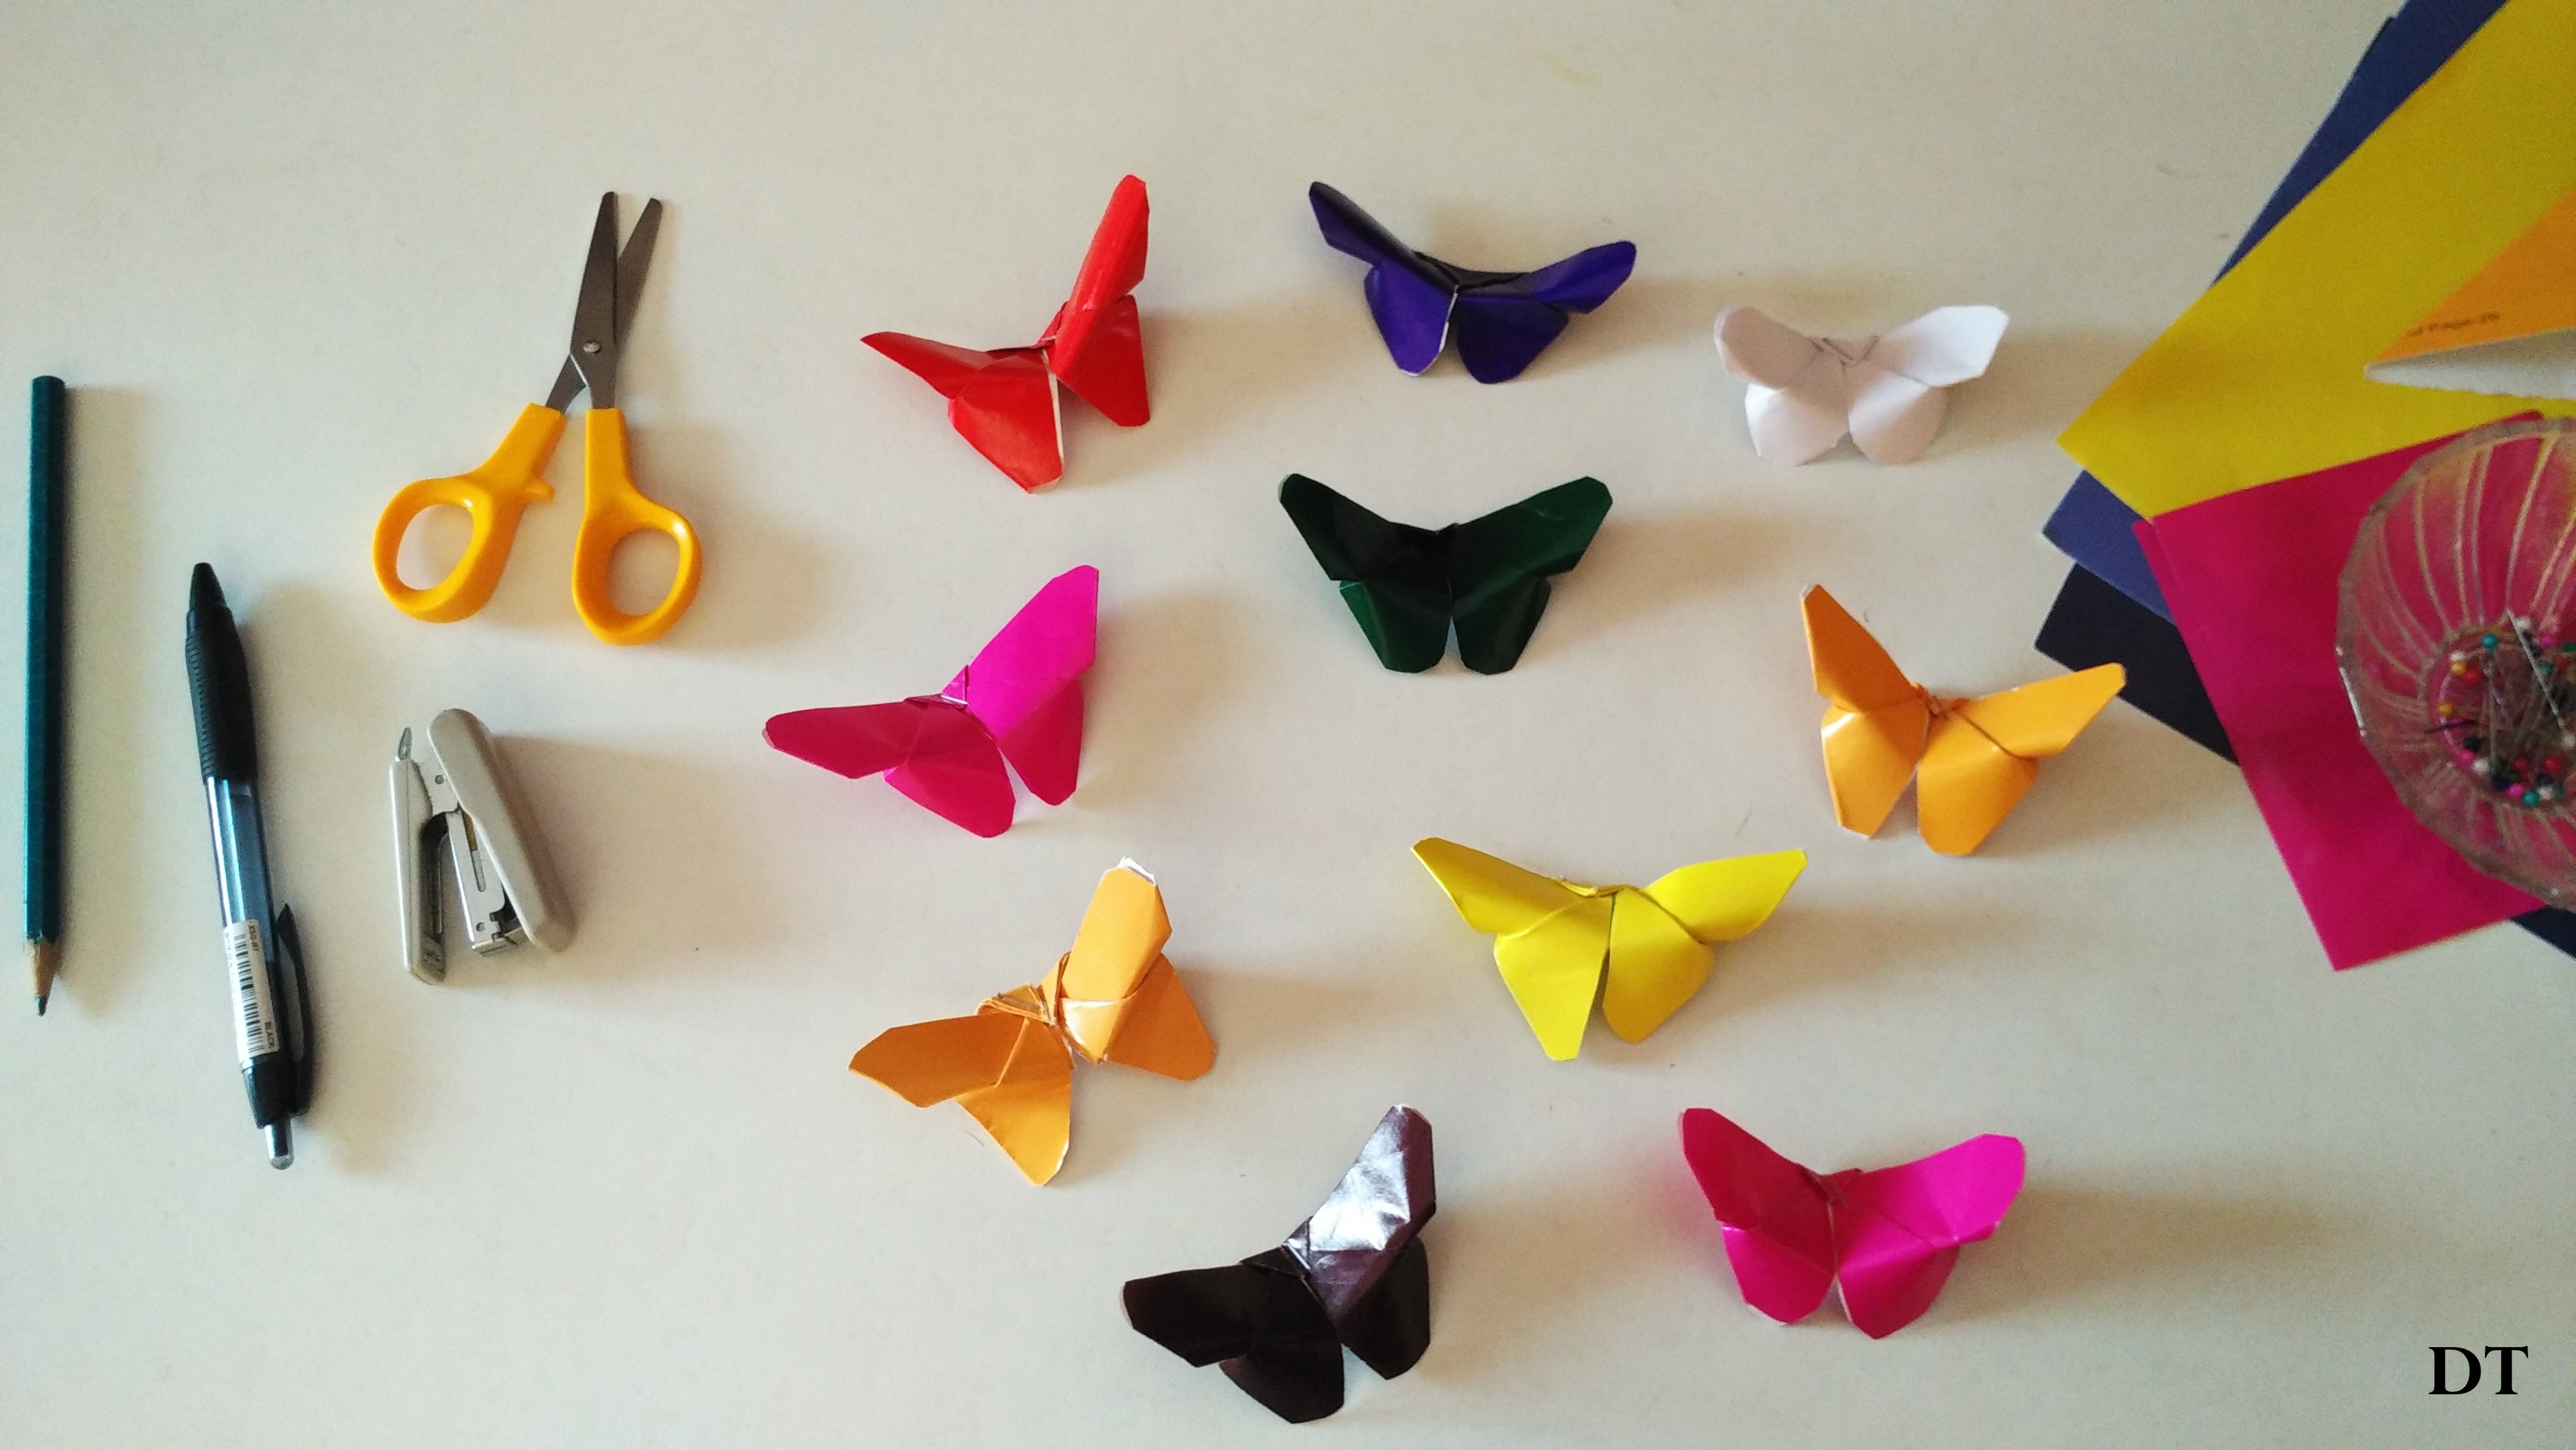 How to make Butterfly? – Part 1